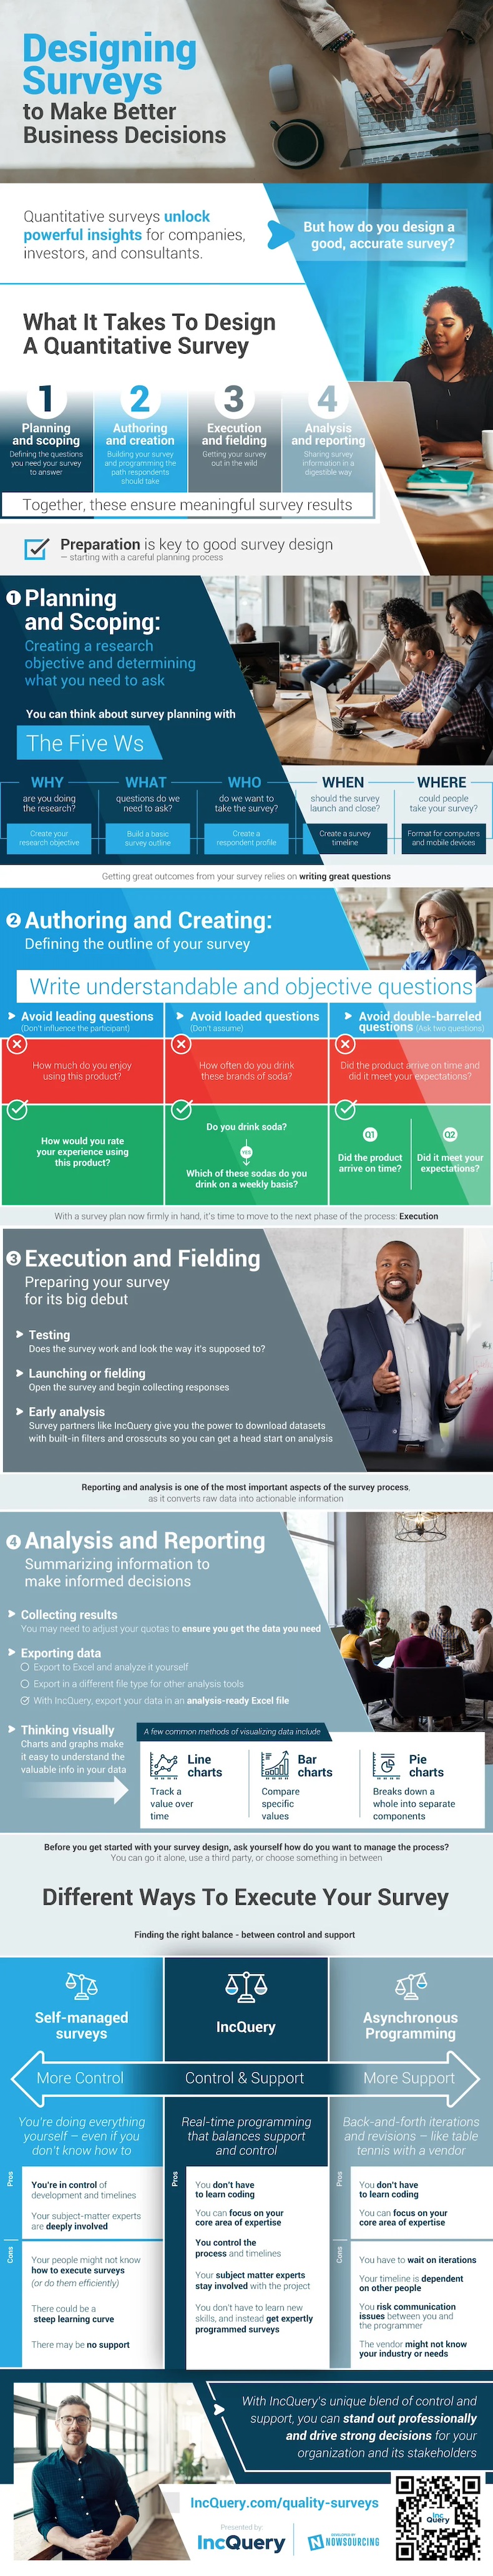 Designing Surveys for Better Business Decisions infographic